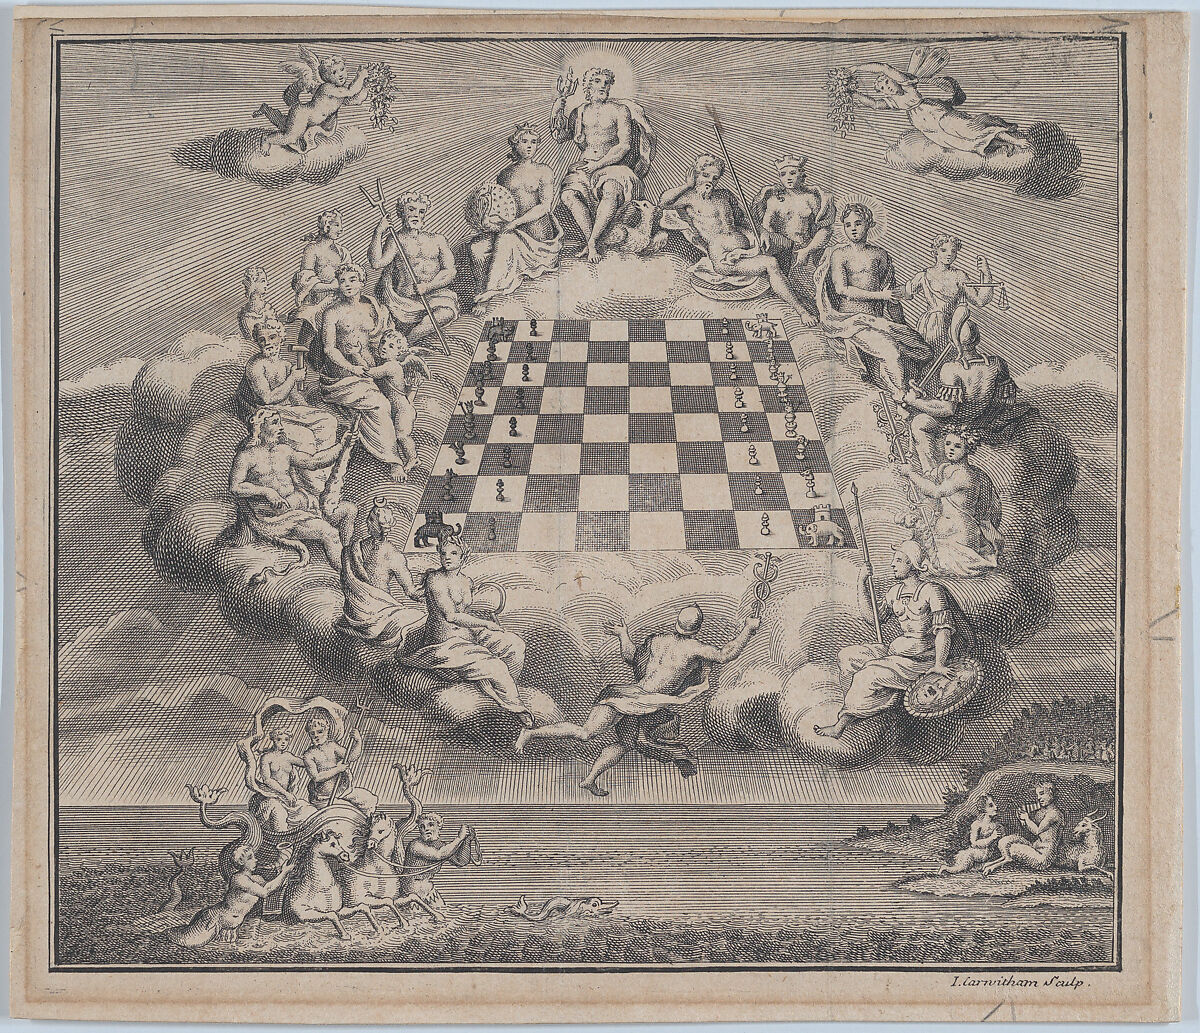 Engraving on the subject of chess. A Game at ChÃ¦ss as it was A